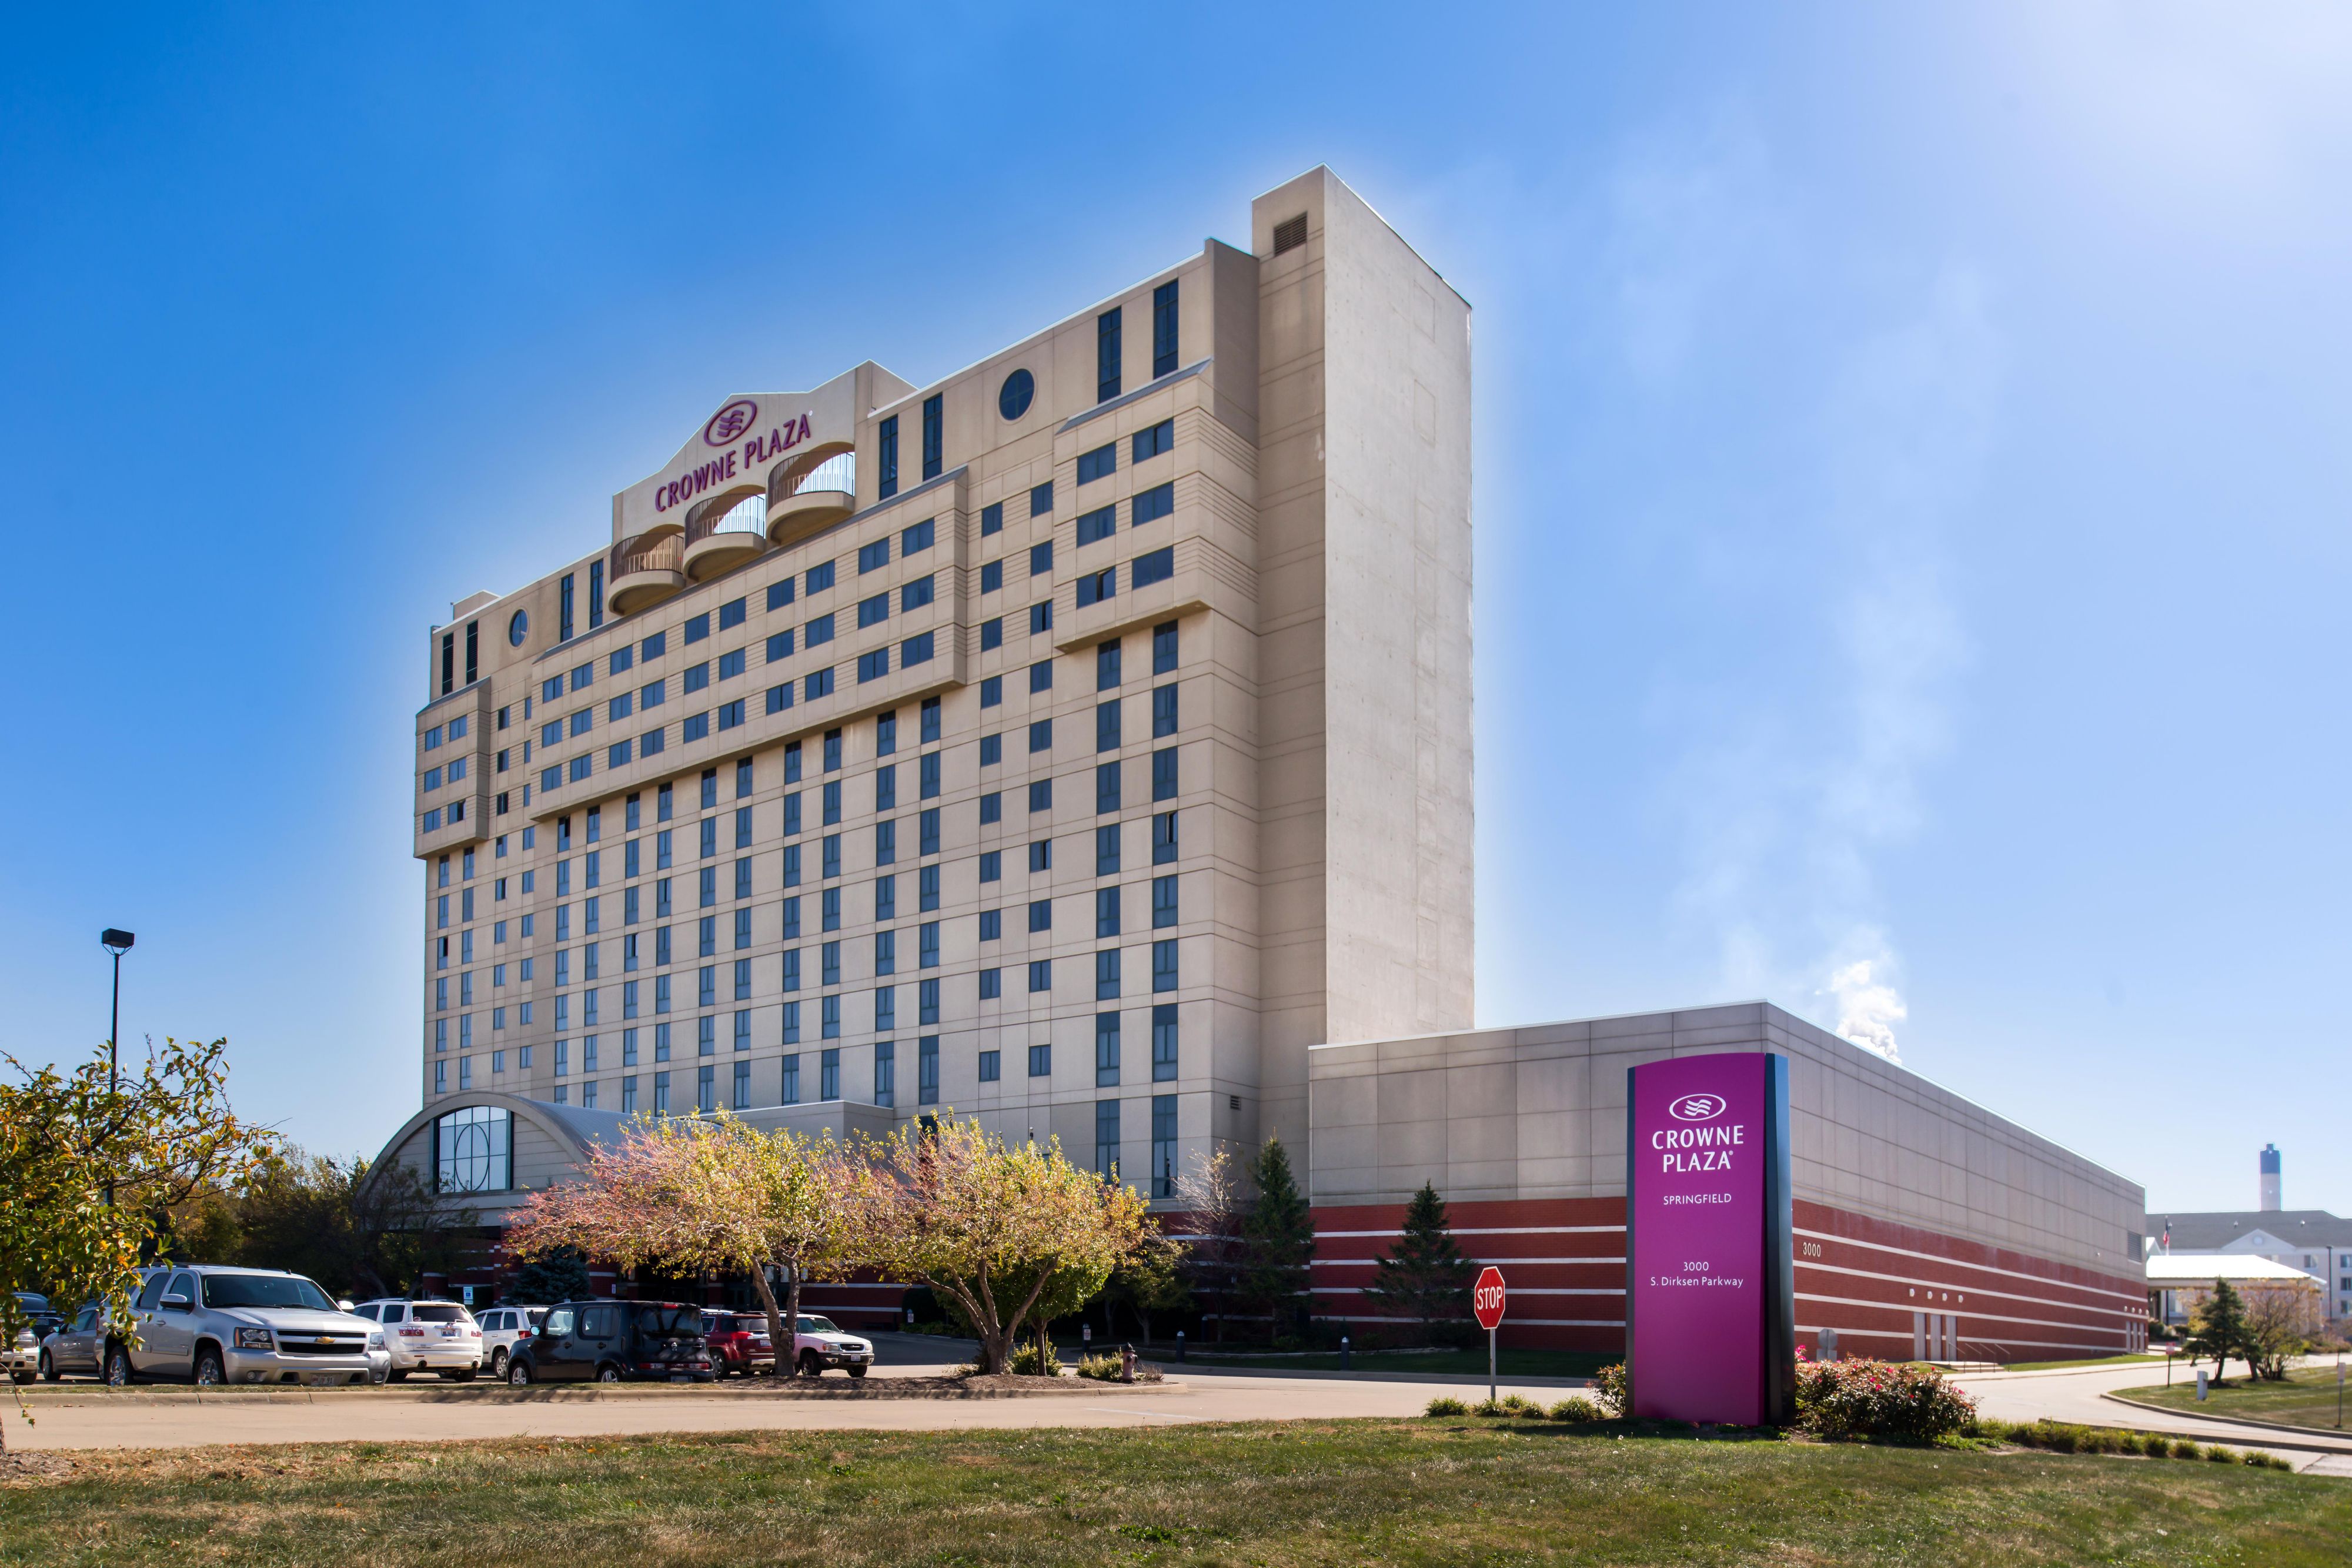 Crowne Plaza is conveniently located off Interstate 55 &amp; 72